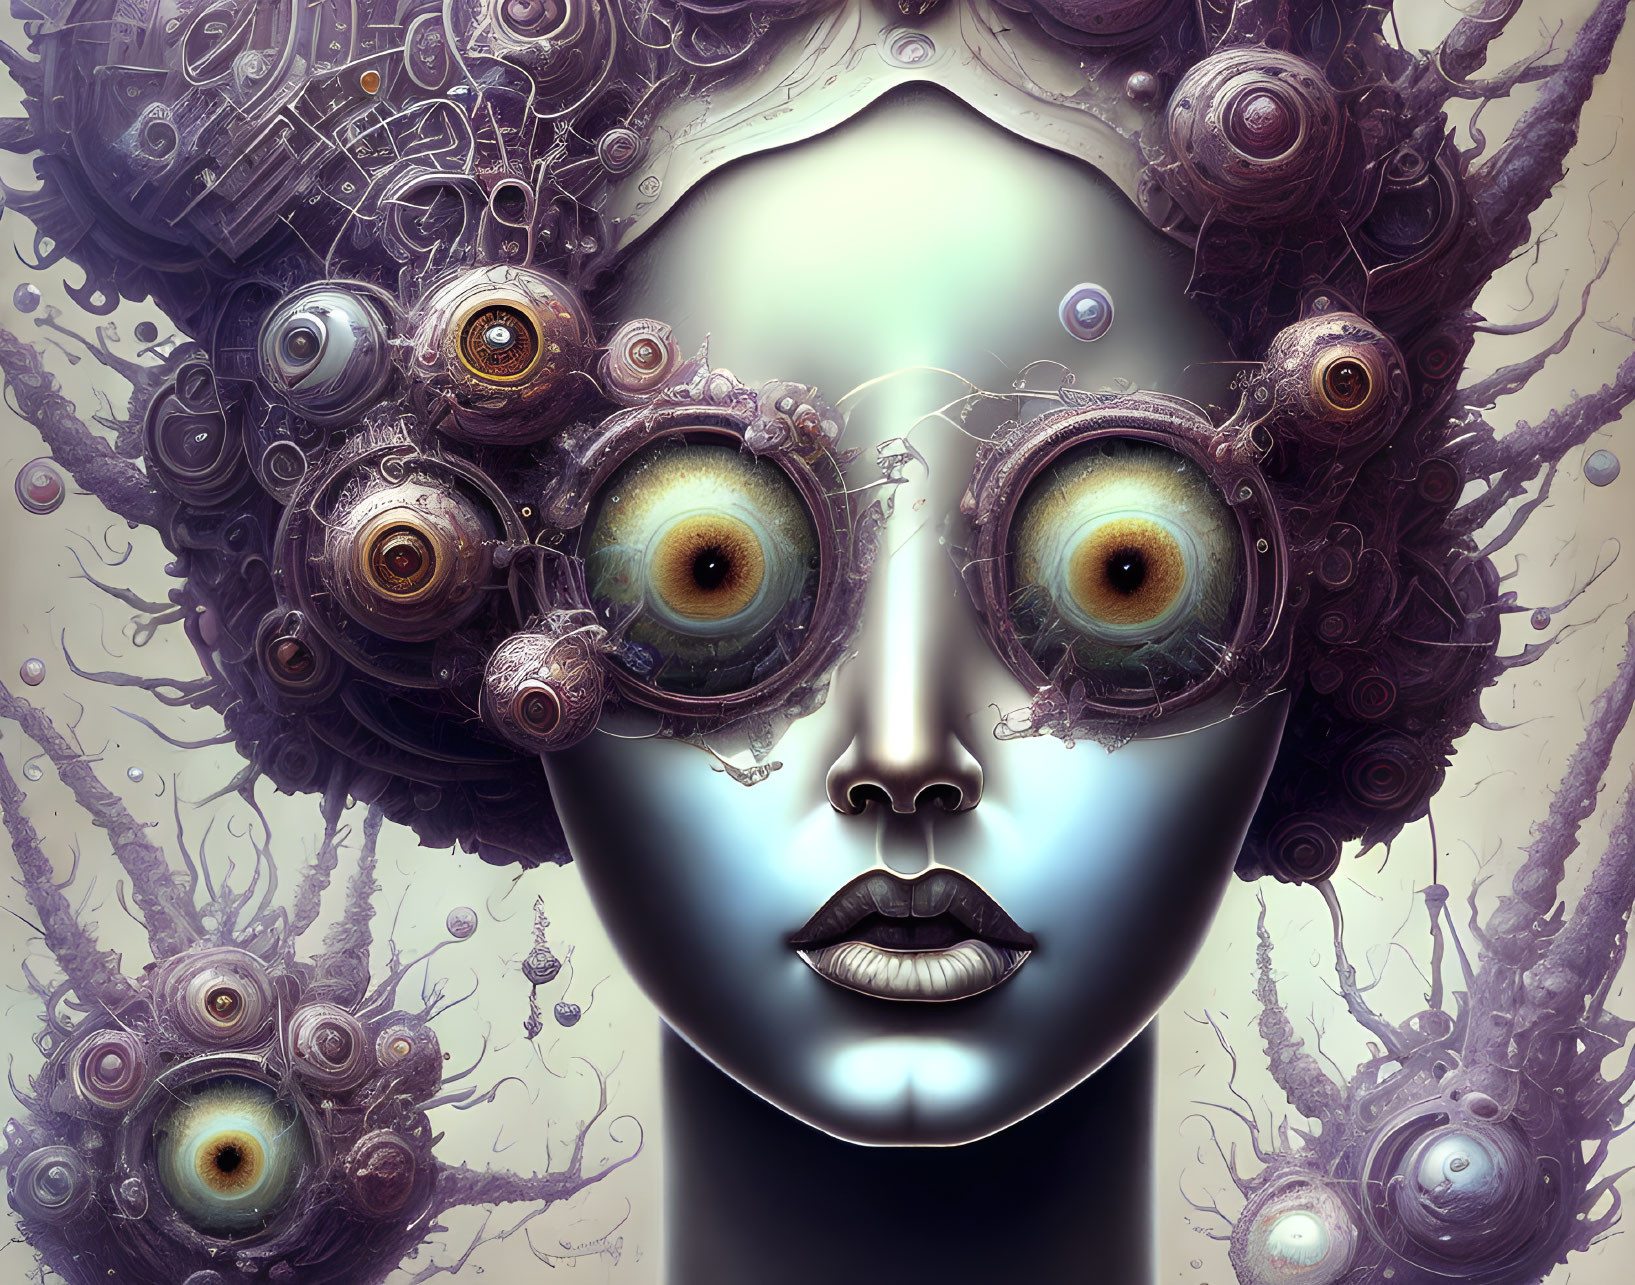 Surreal portrait: being with multiple yellow eyes and mechanical parts in head